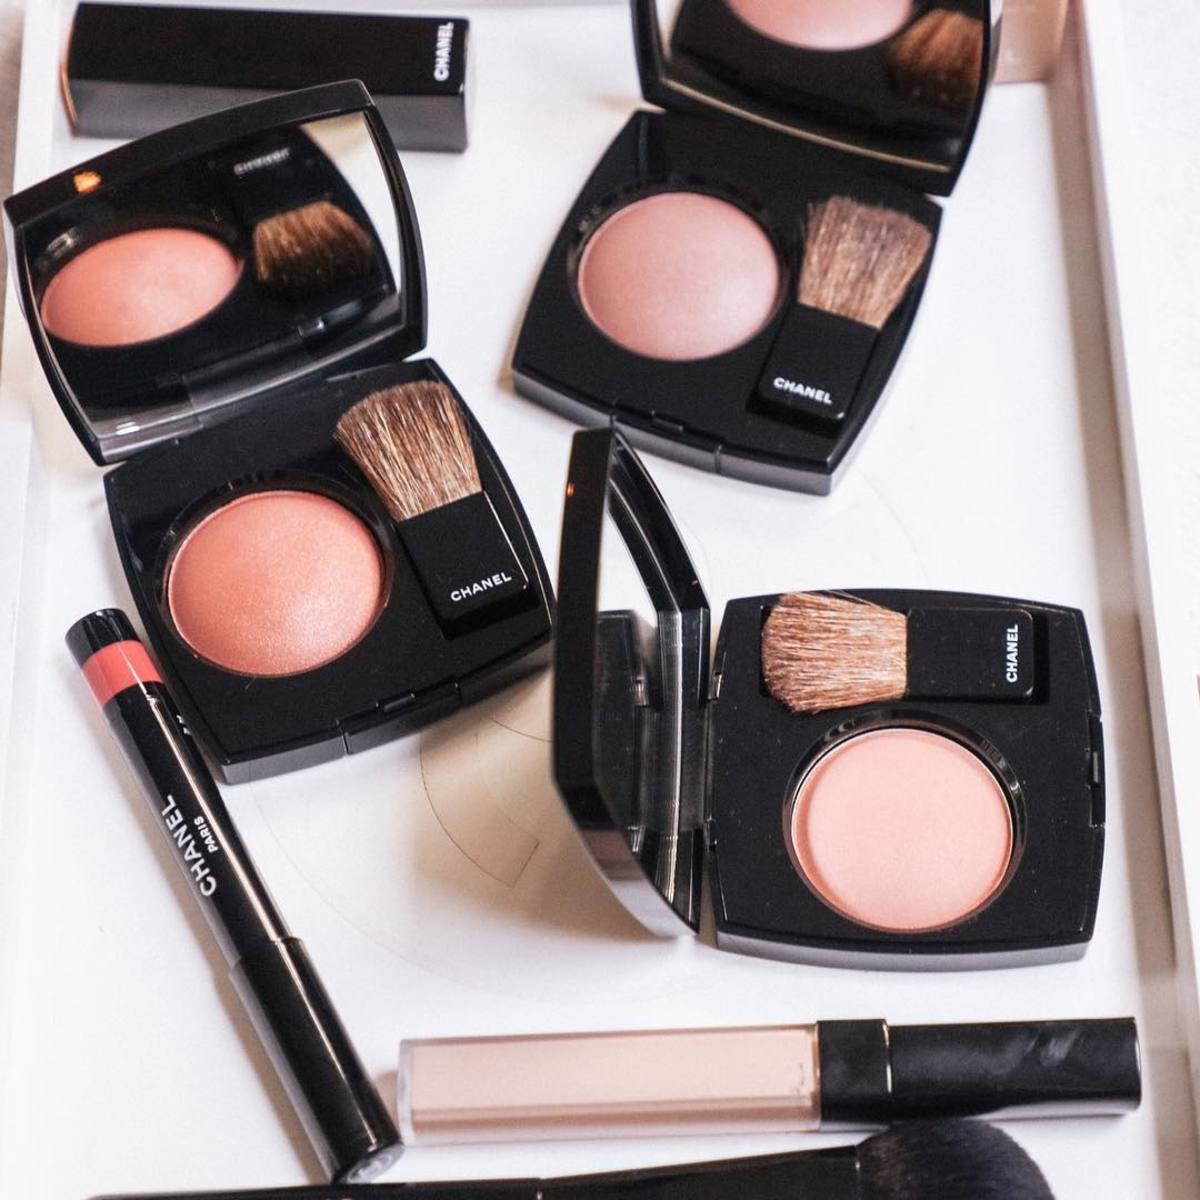 A selection of products from Chanel's beauty range. Photo: @welovecoco/Instagram